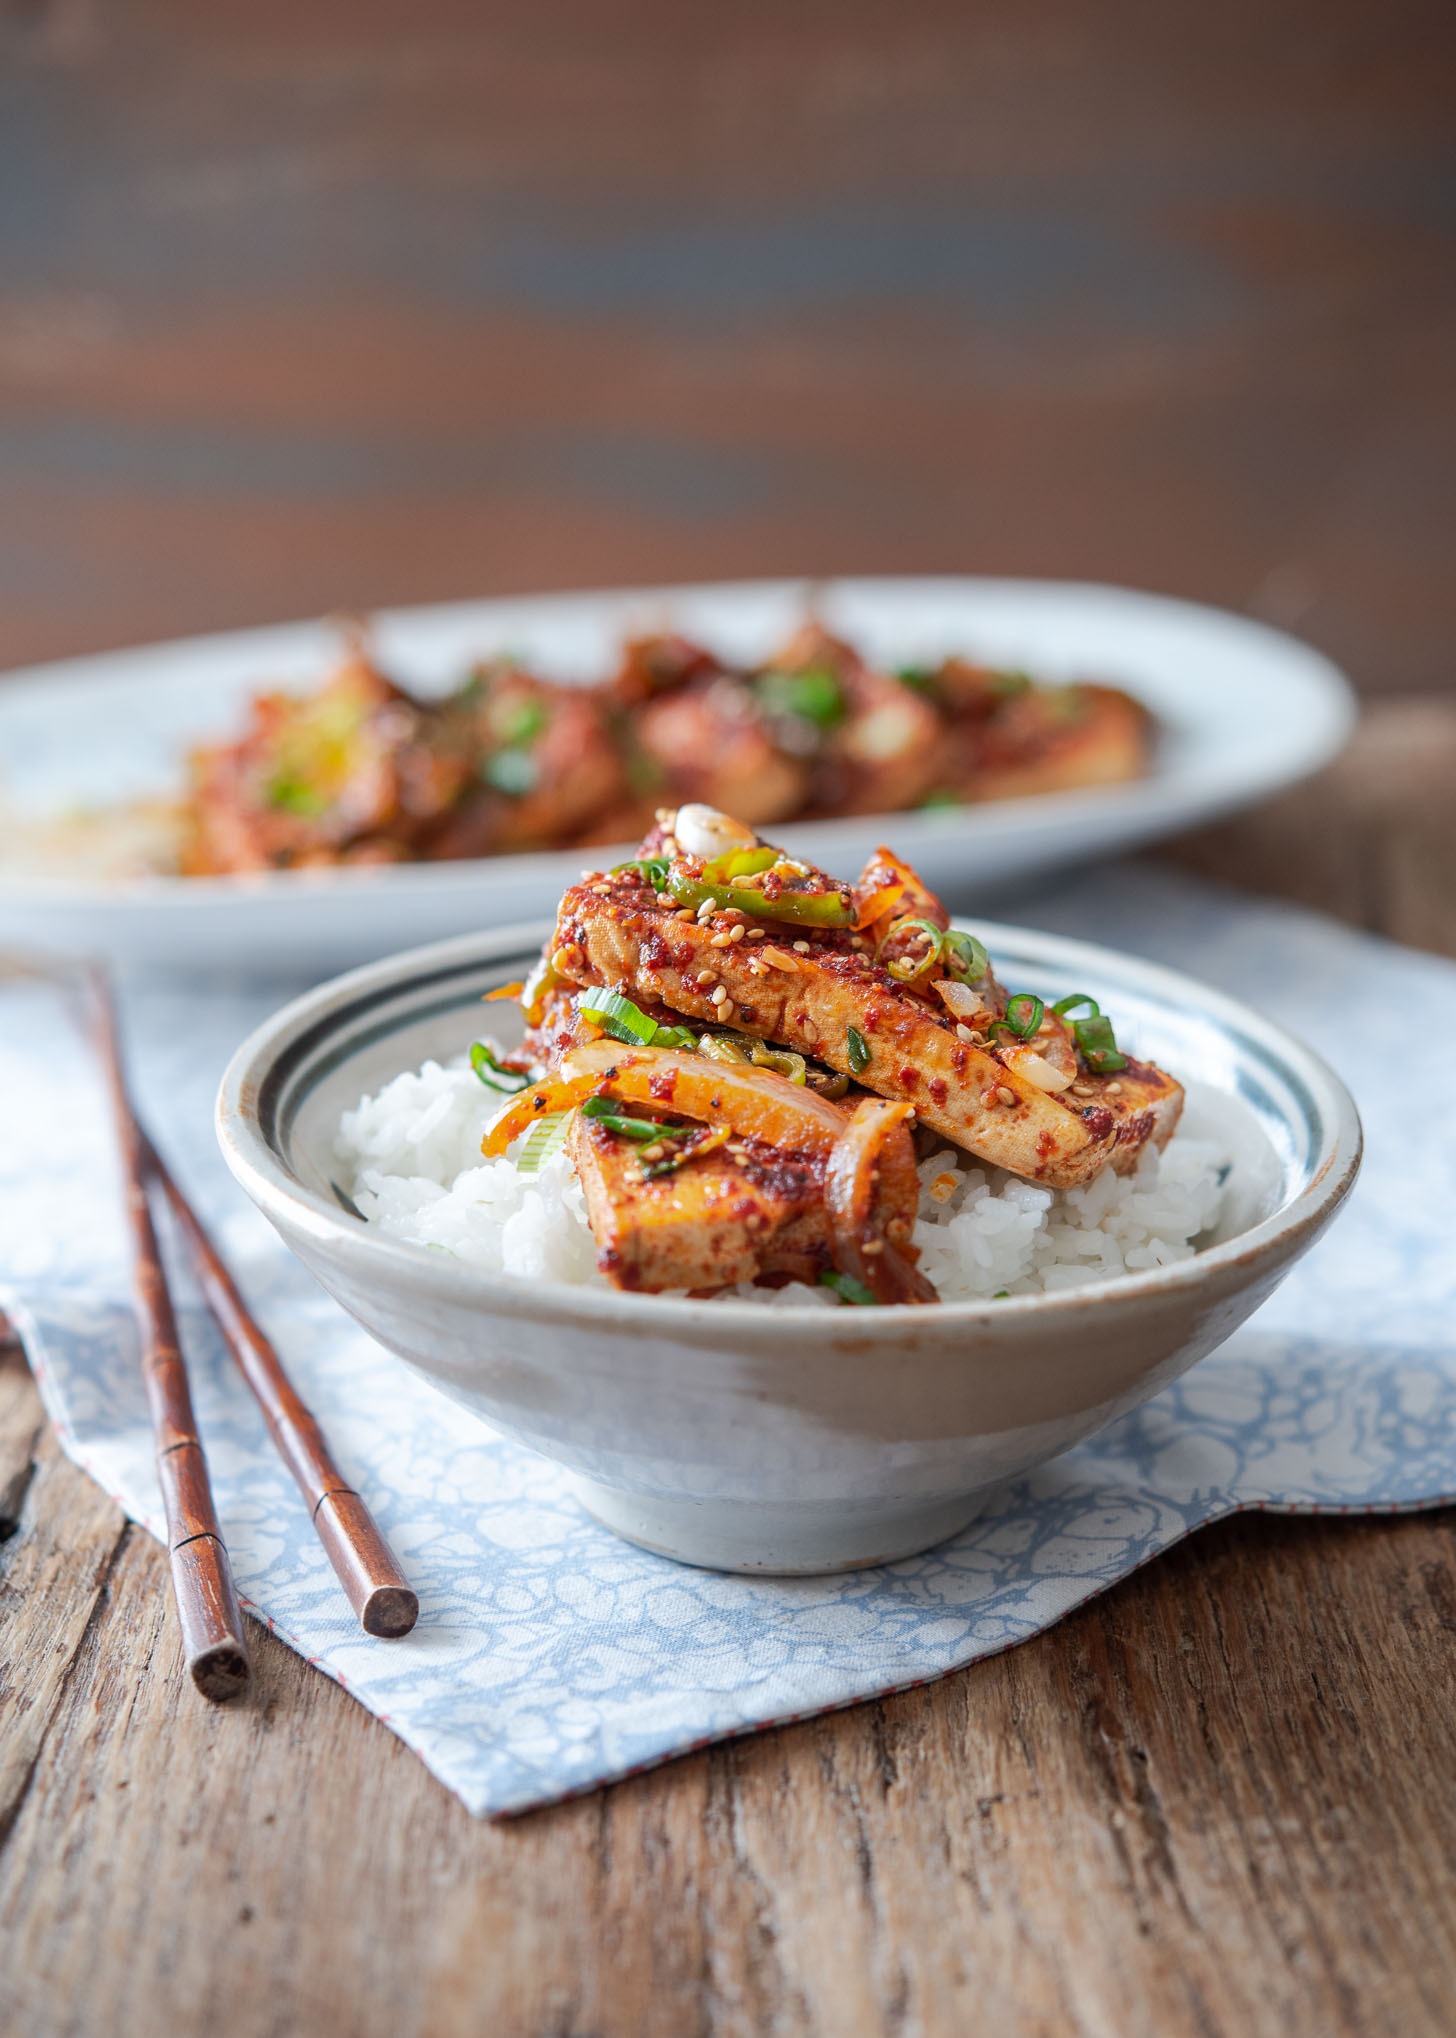 Spicy braised tofu slices are placed on top of a bowl of white rice